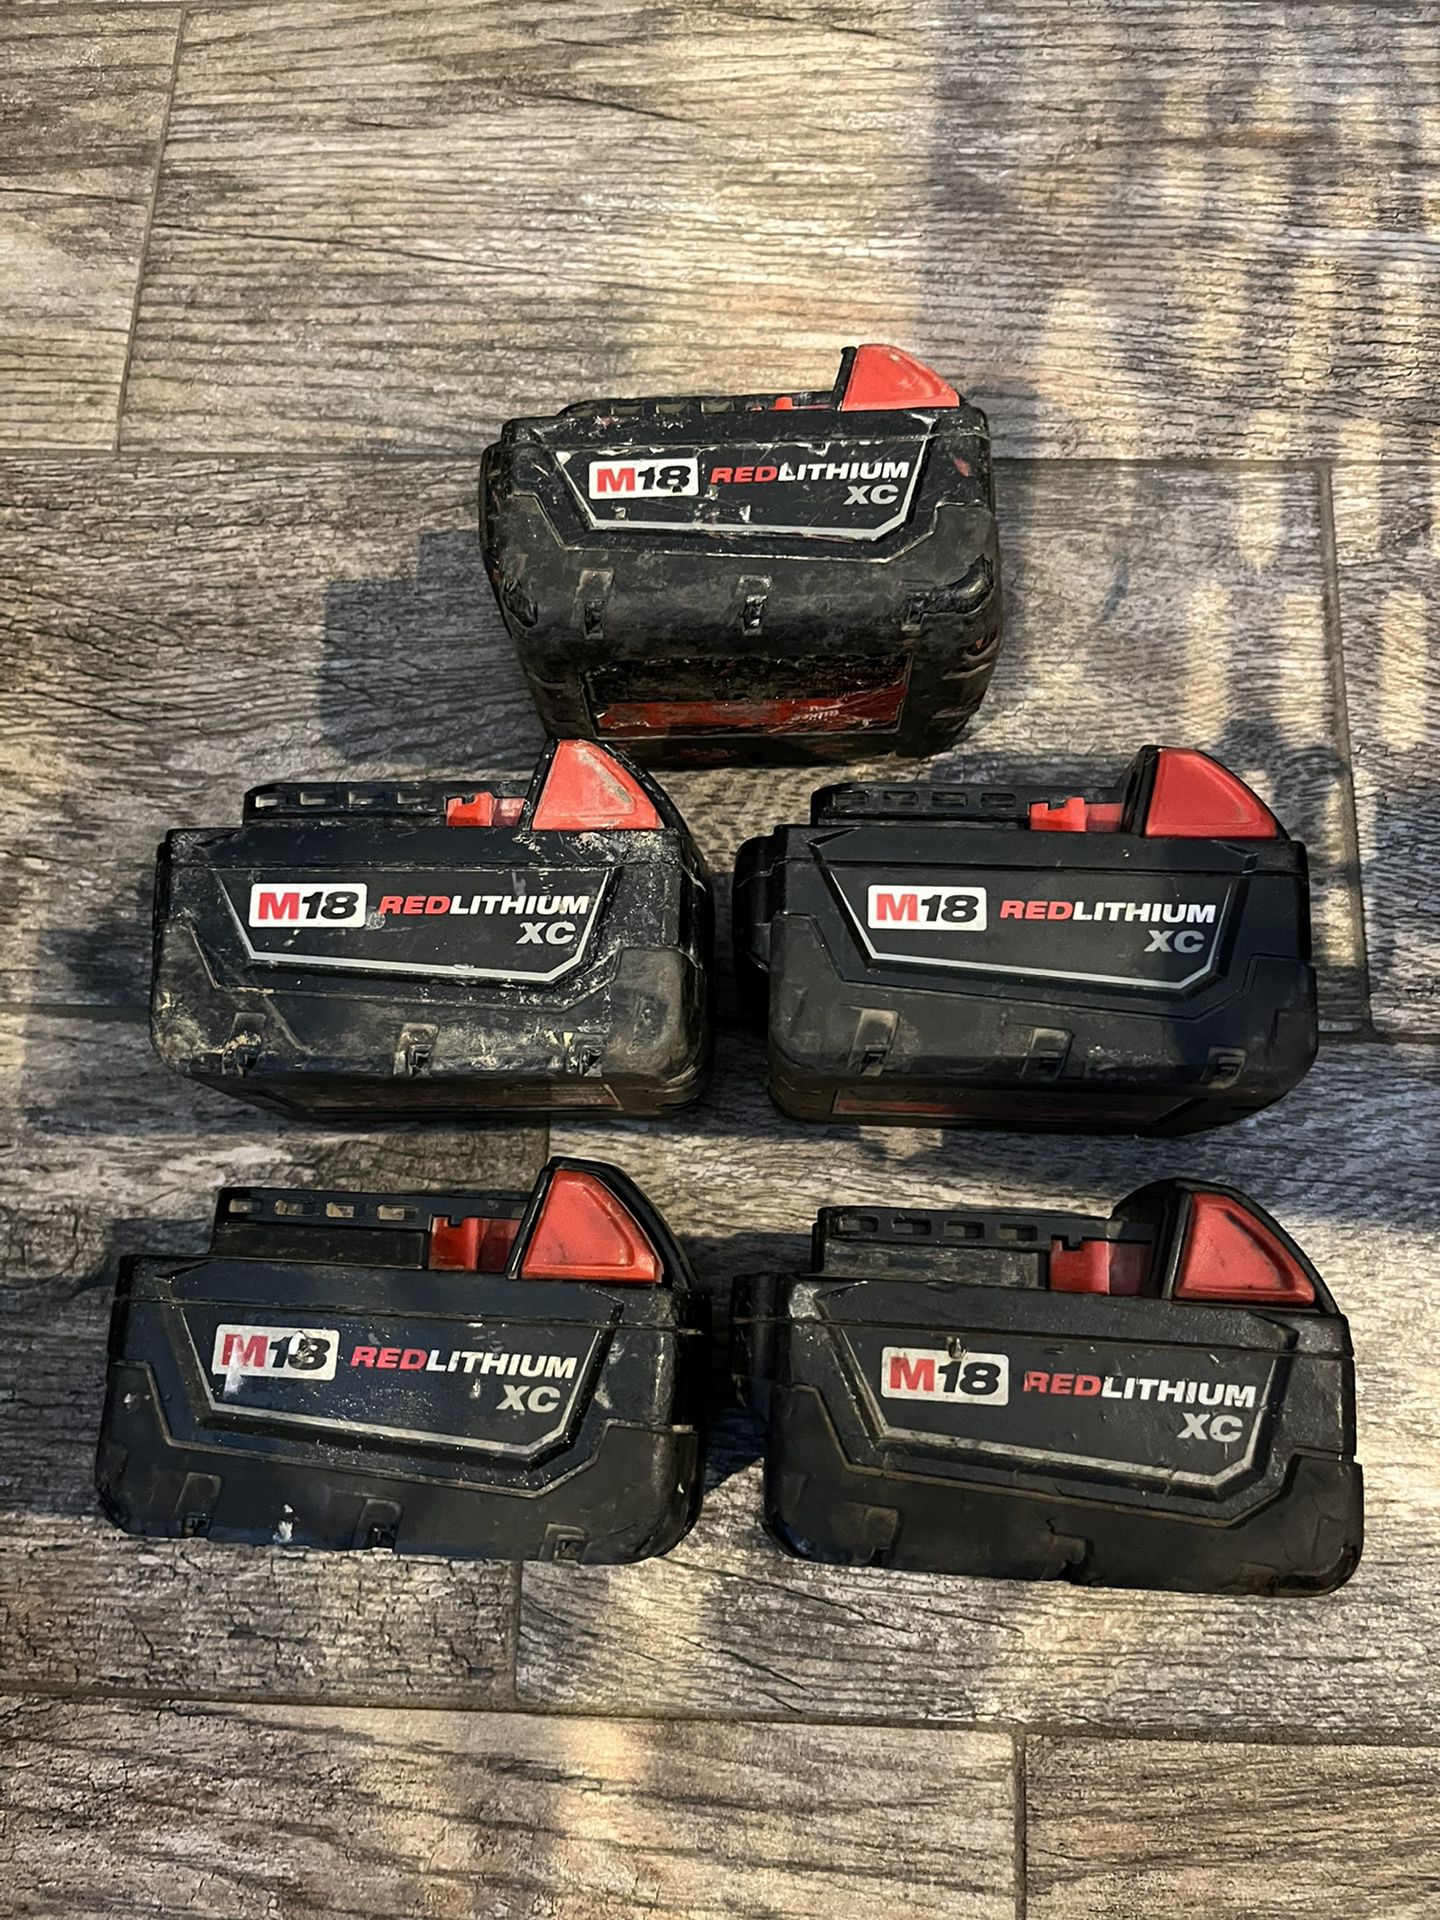 LOT OF (5) USED MILWAUKEE M18 RED LITHIUM XC 3.0 BATTERY PACK TOOL GENUINE OEM ORIGINAL  Stock Photo. The cosmetic condition will vary but the battery